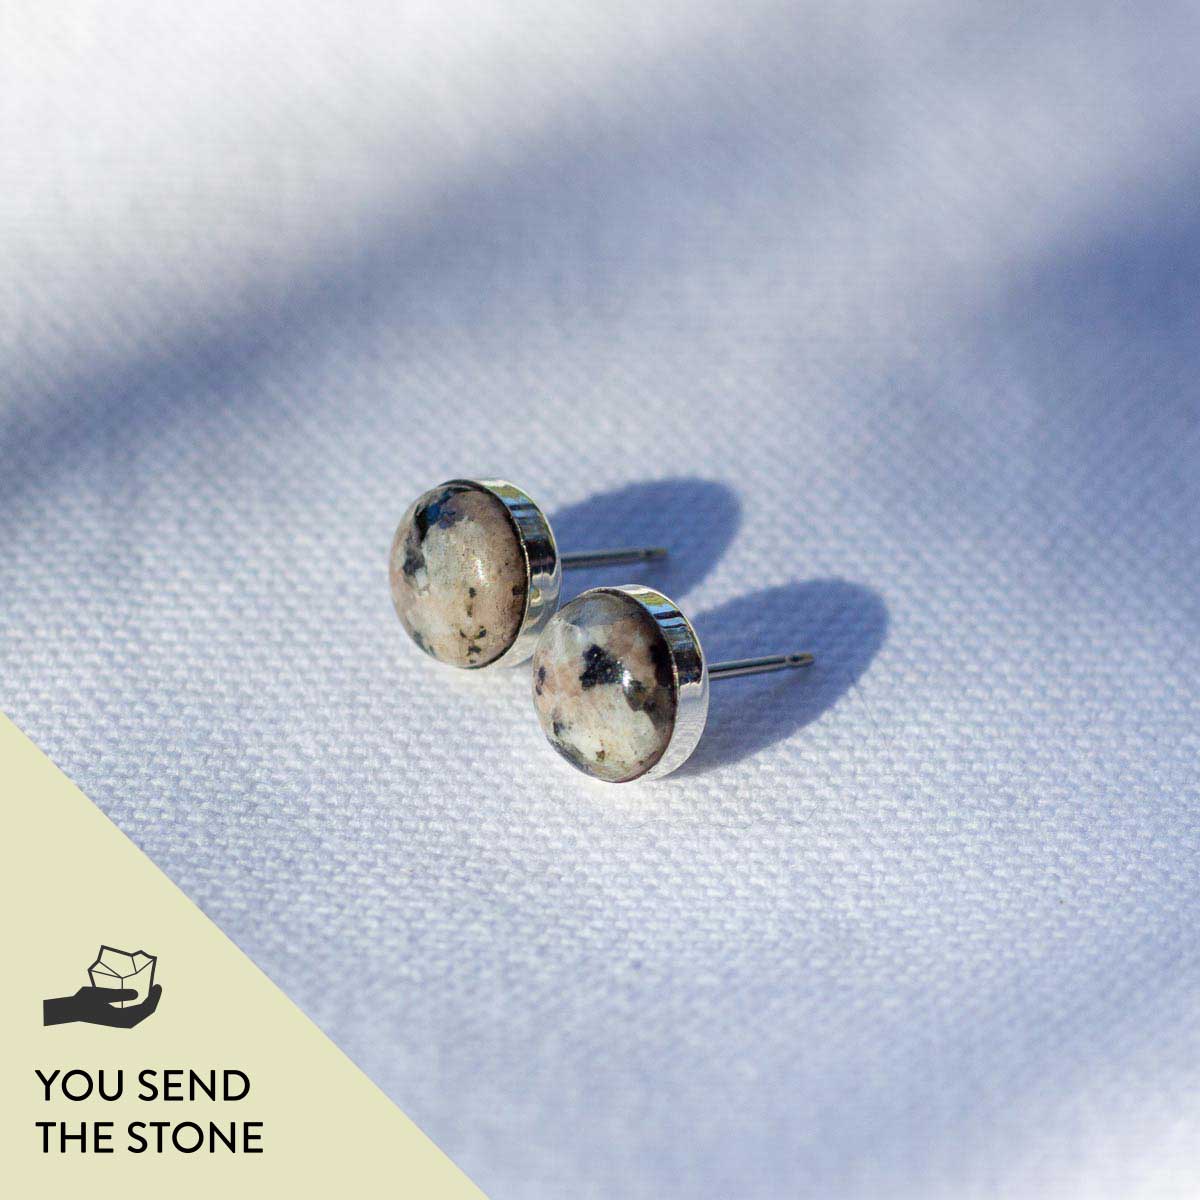 Small round stud earrings made of natural stone. Text on the image reads, "You send the stone."